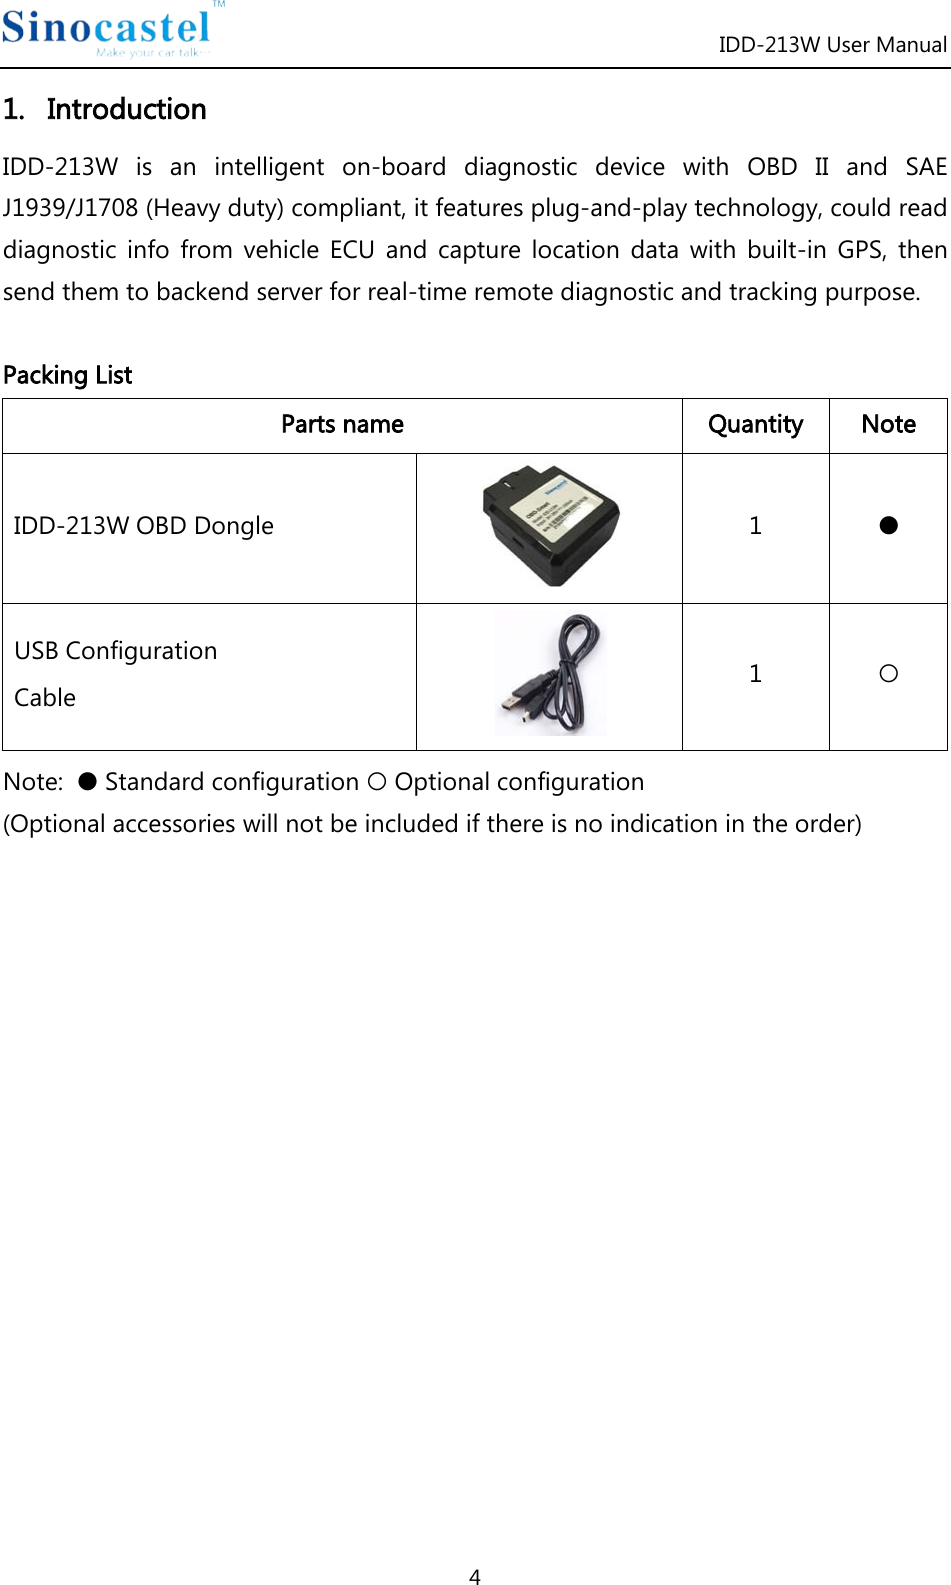 IDD-213W User Manual 4 1.   Introduction IDD-213W  is an intelligent on-board diagnostic device with OBD II and SAE J1939/J1708 (Heavy duty) compliant, it features plug-and-play technology, could read diagnostic info from vehicle ECU and capture location data with built-in GPS, then send them to backend server for real-time remote diagnostic and tracking purpose.  Packing List Parts name Quantity Note IDD-213W OBD Dongle  1  ● USB Configuration Cable  1  ○ Note:  ● Standard configuration ○ Optional configuration  (Optional accessories will not be included if there is no indication in the order)                 